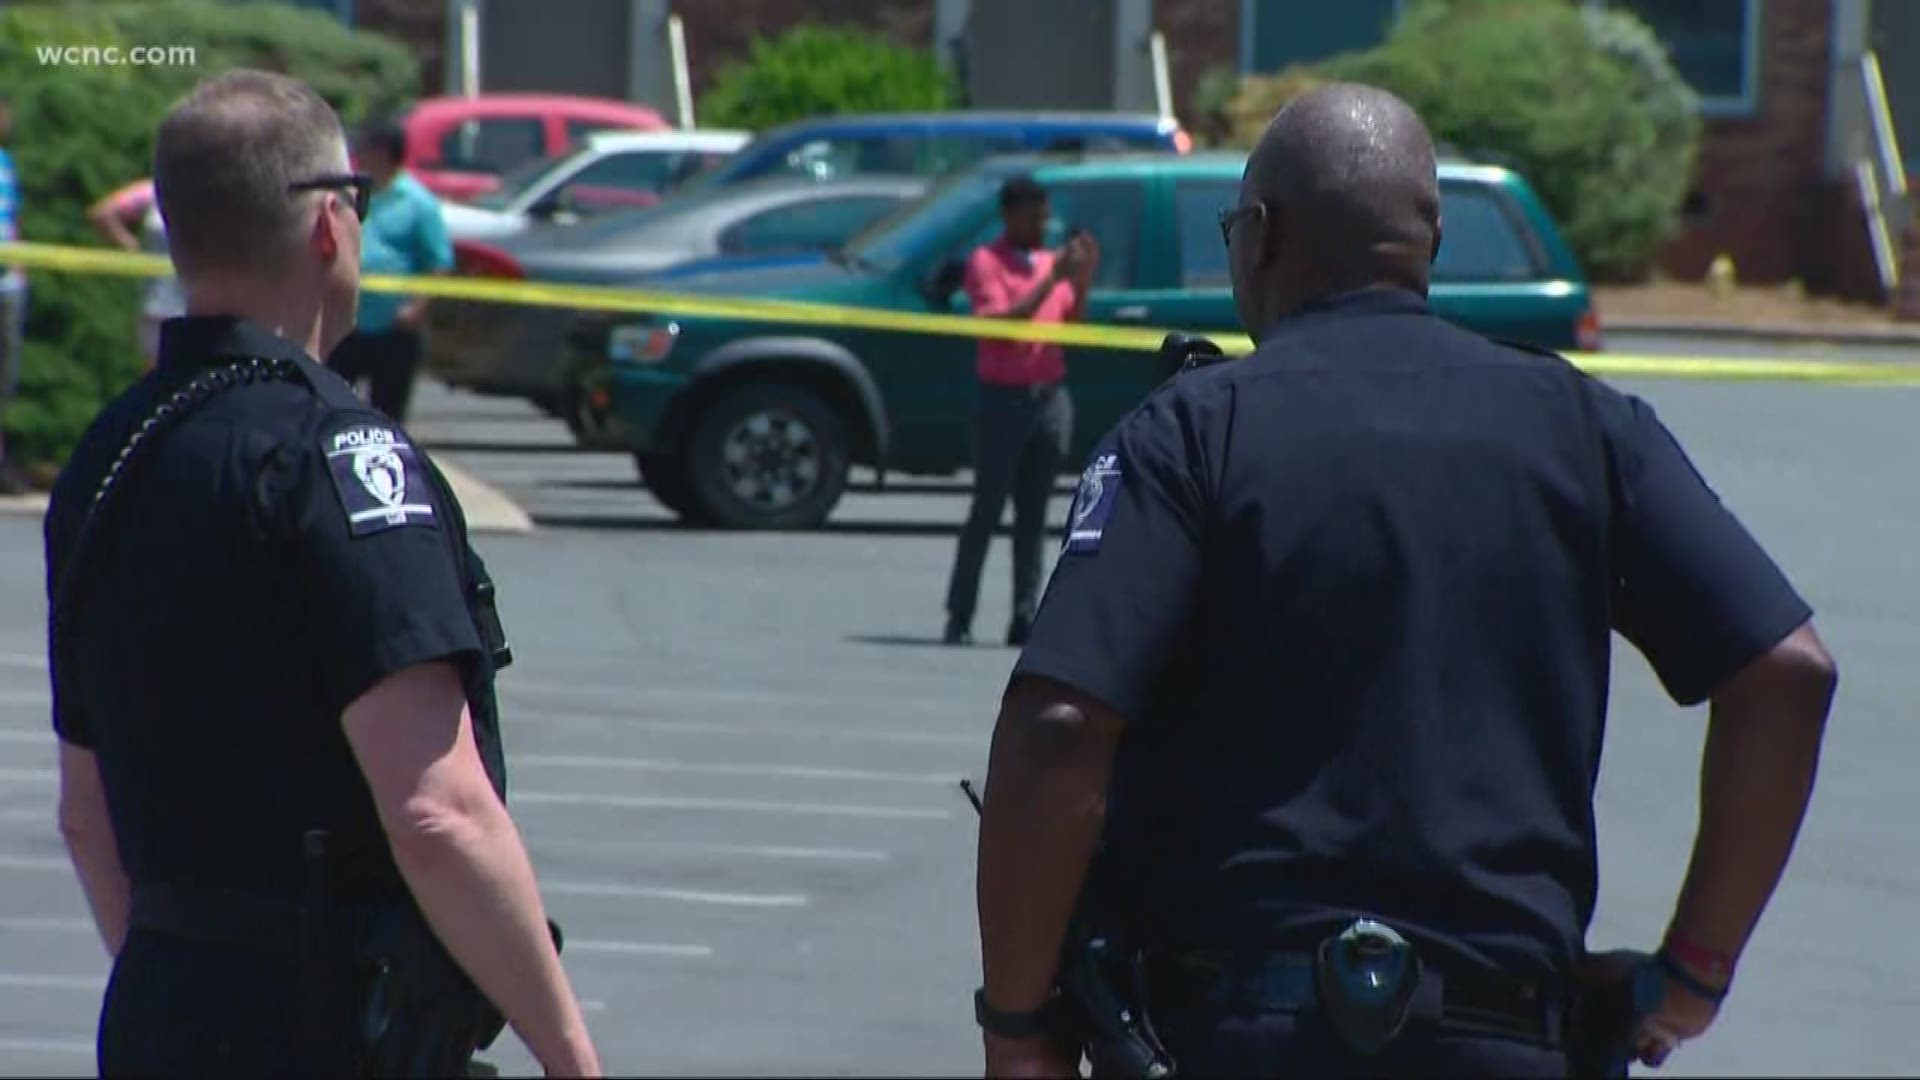 CMPD is investigating a homicide after one person was fatally shot and another was hospitalized Saturday afternoon.